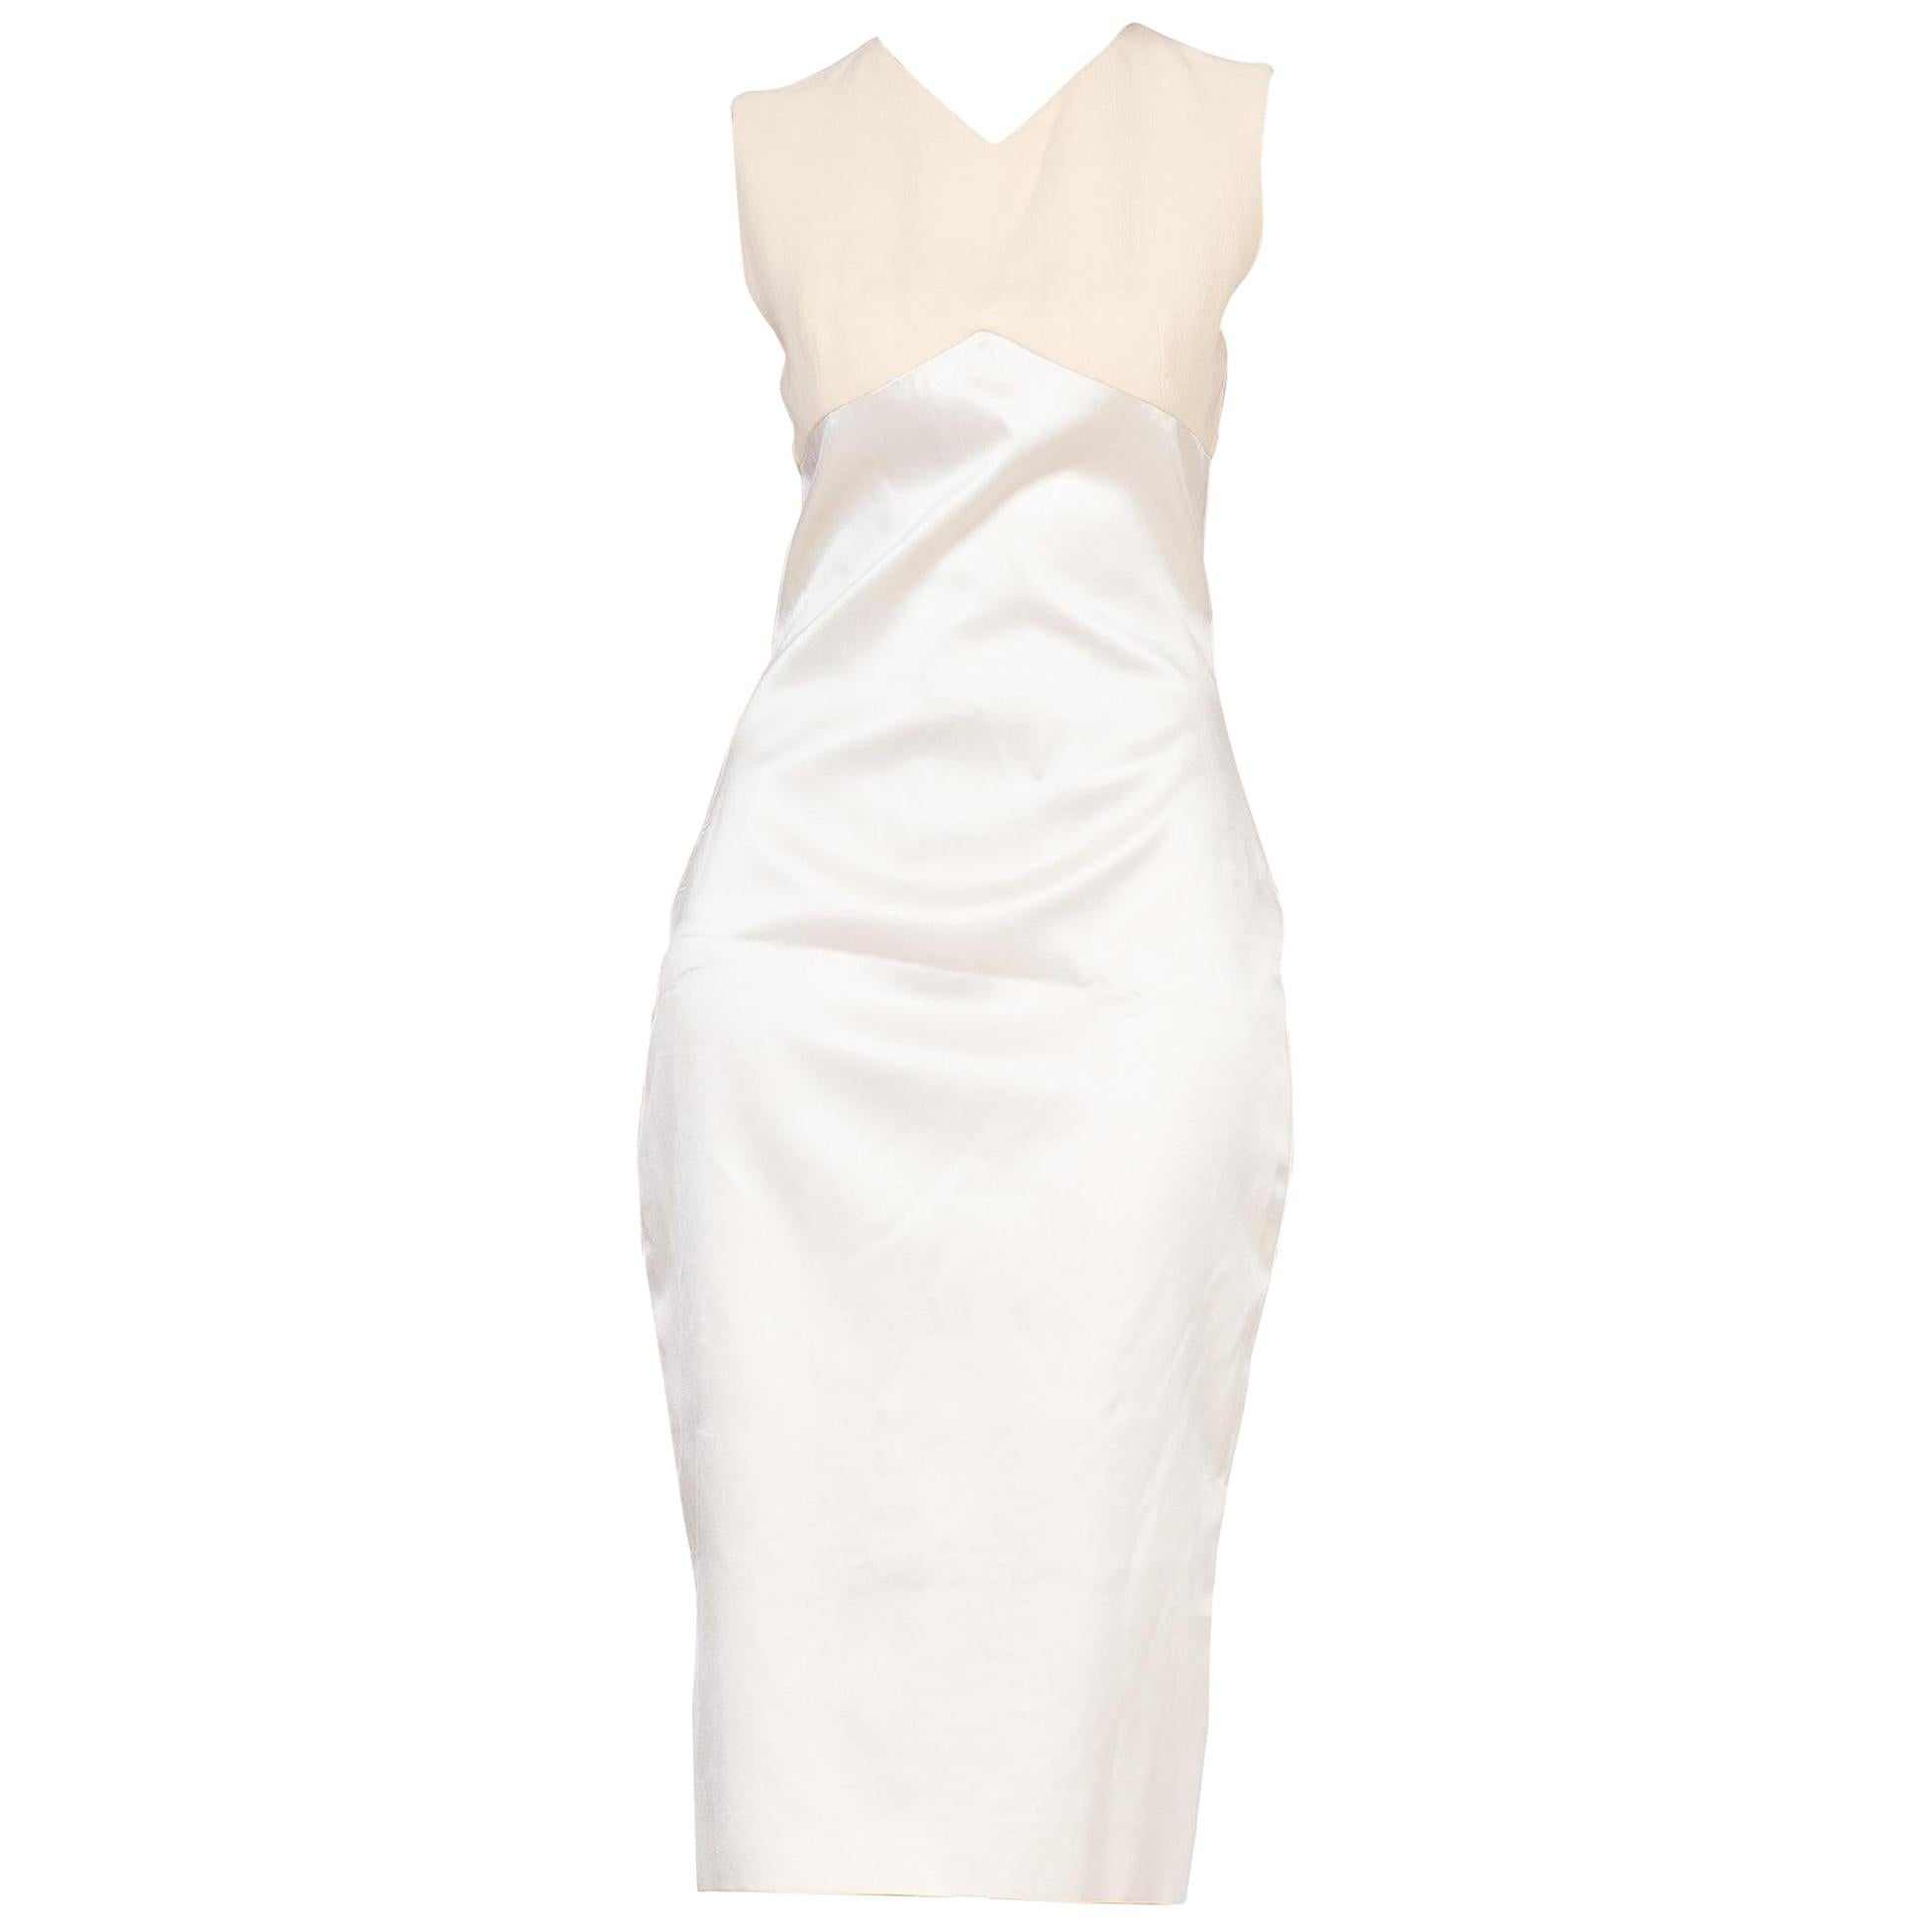 1990S GIANNI VERSACE Cream Silk Satin Sharply Fitted Dress With Stretch ...